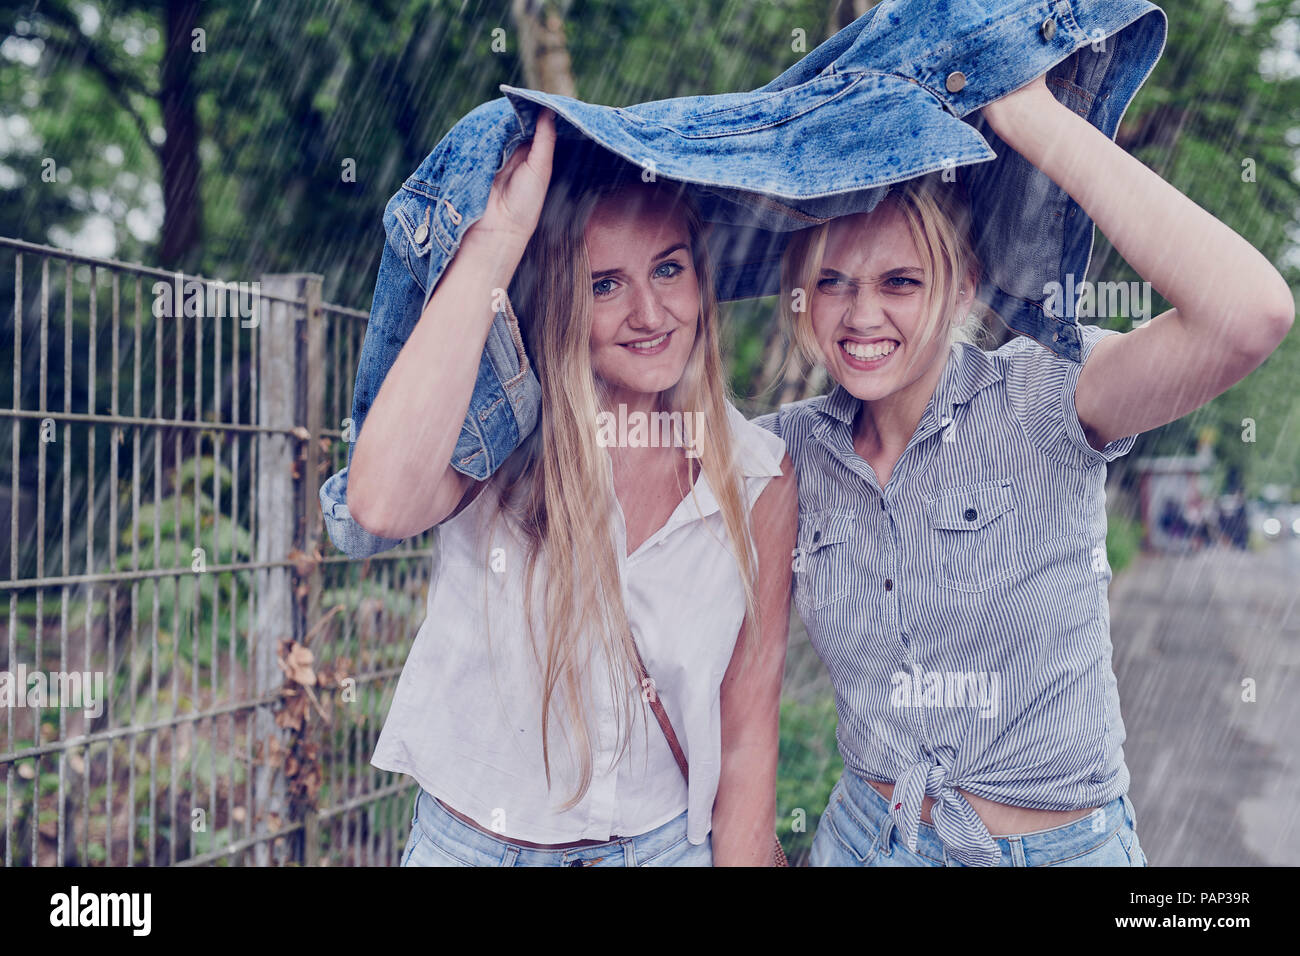 Two young women shletering from rain with a denim jacket Stock Photo